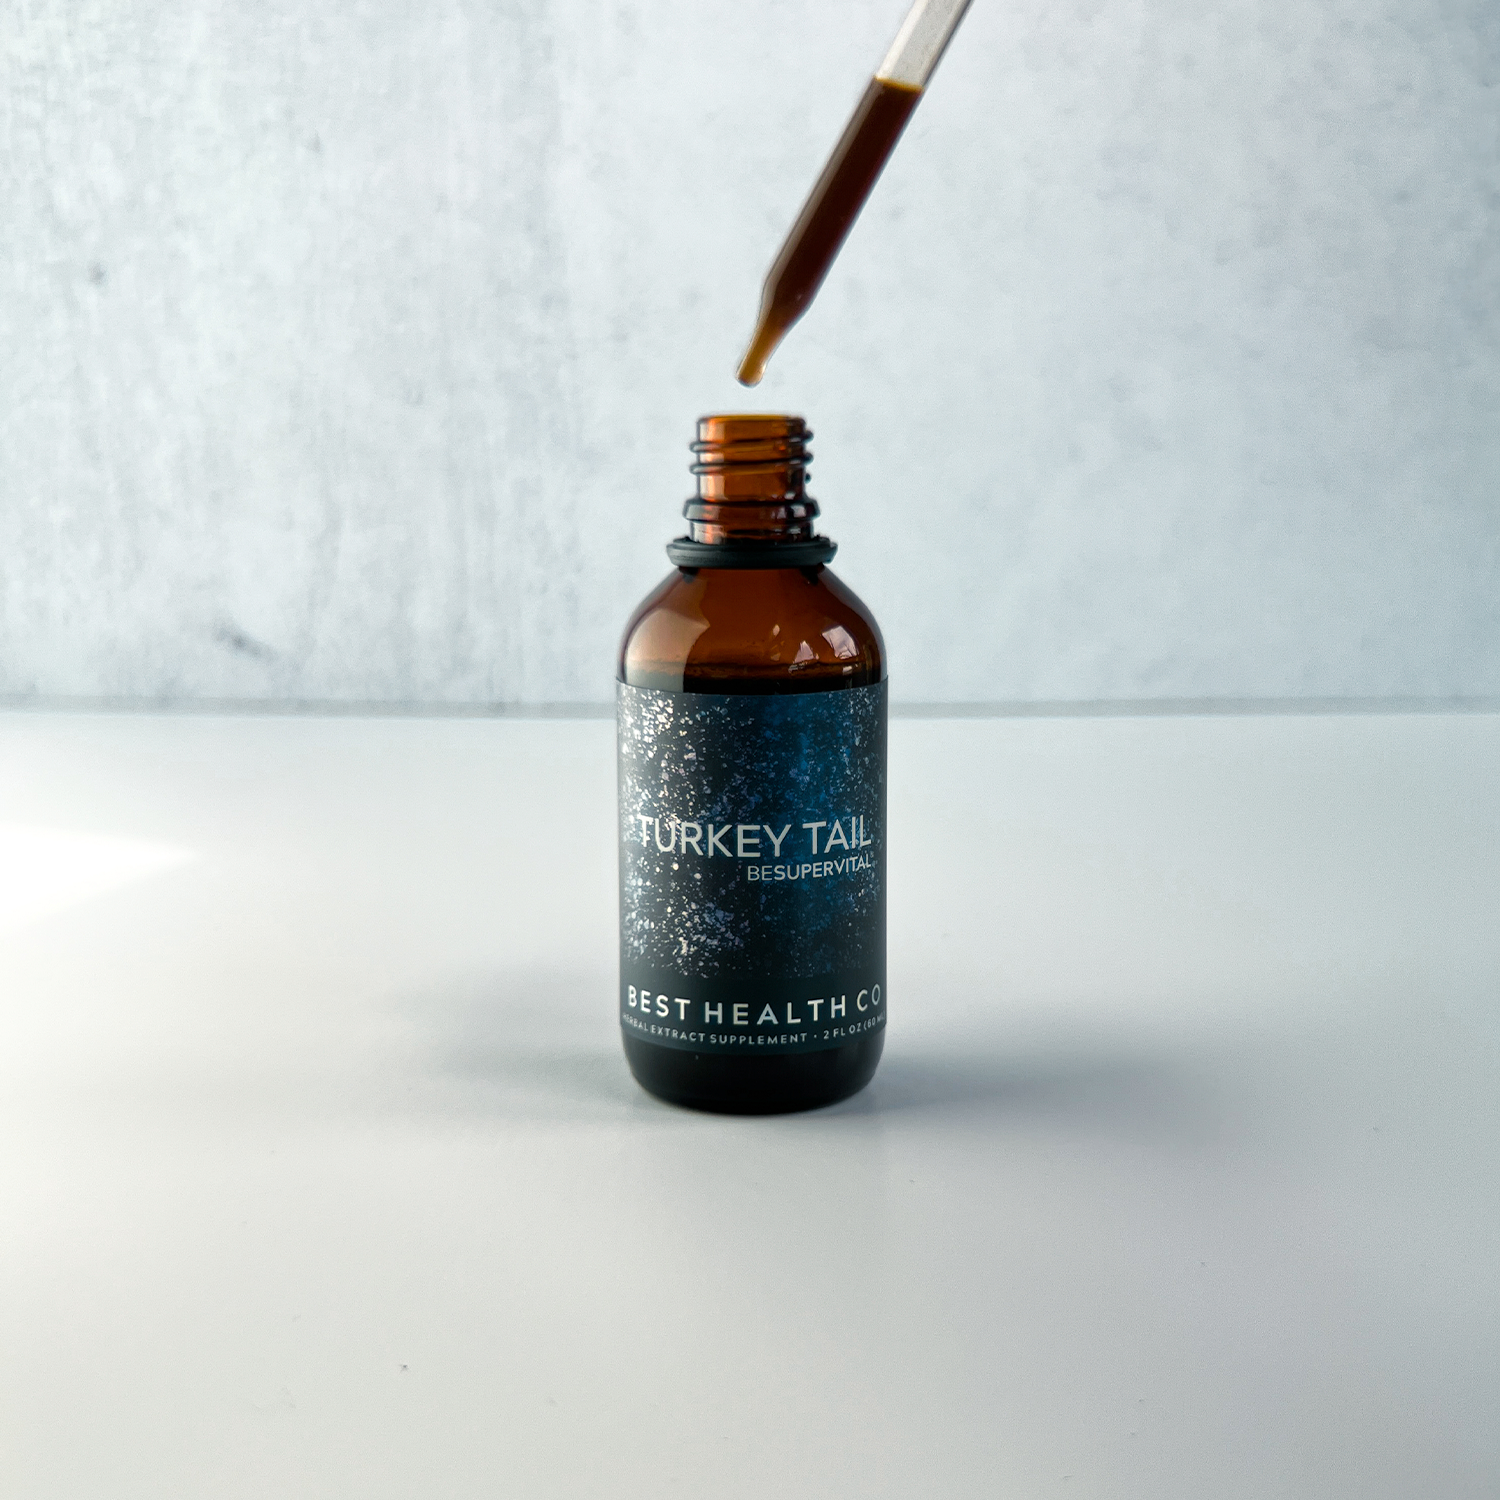 TURKEY TAIL mushroom extract with dropper from Best Health Co.